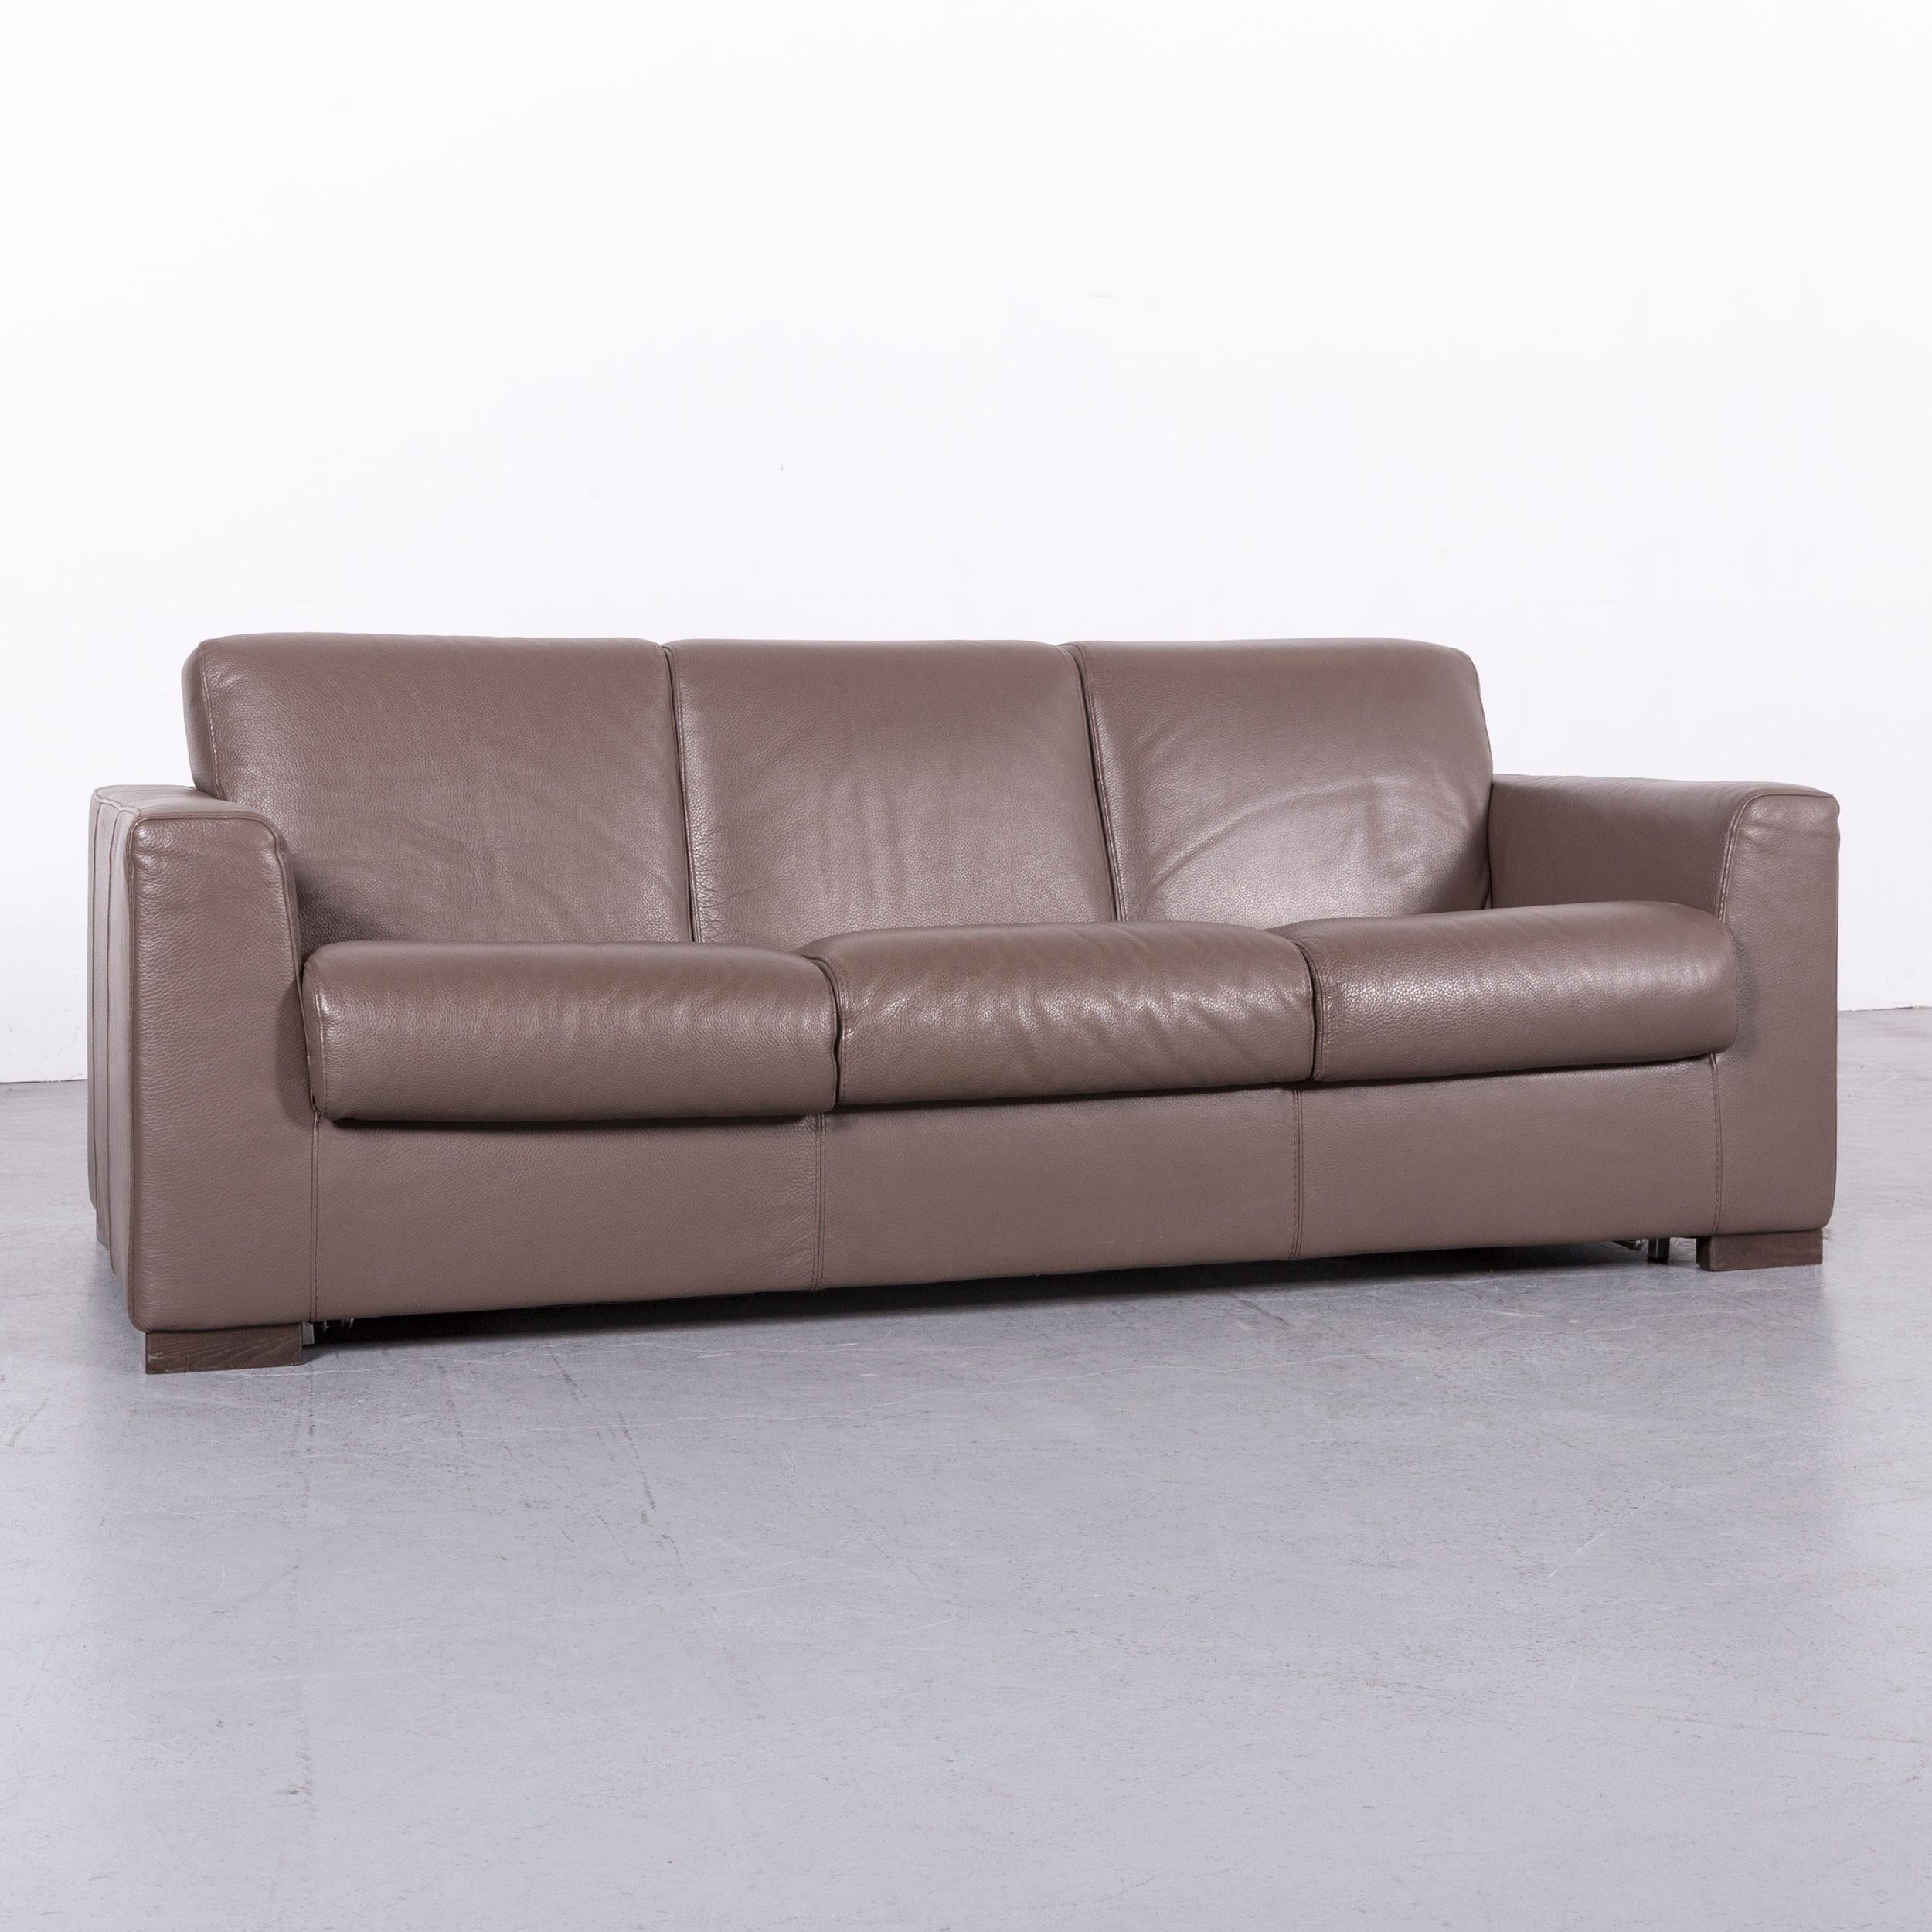 We bring to you a Natuzzi designer leather sofa three-seat couch brown with sleep function.